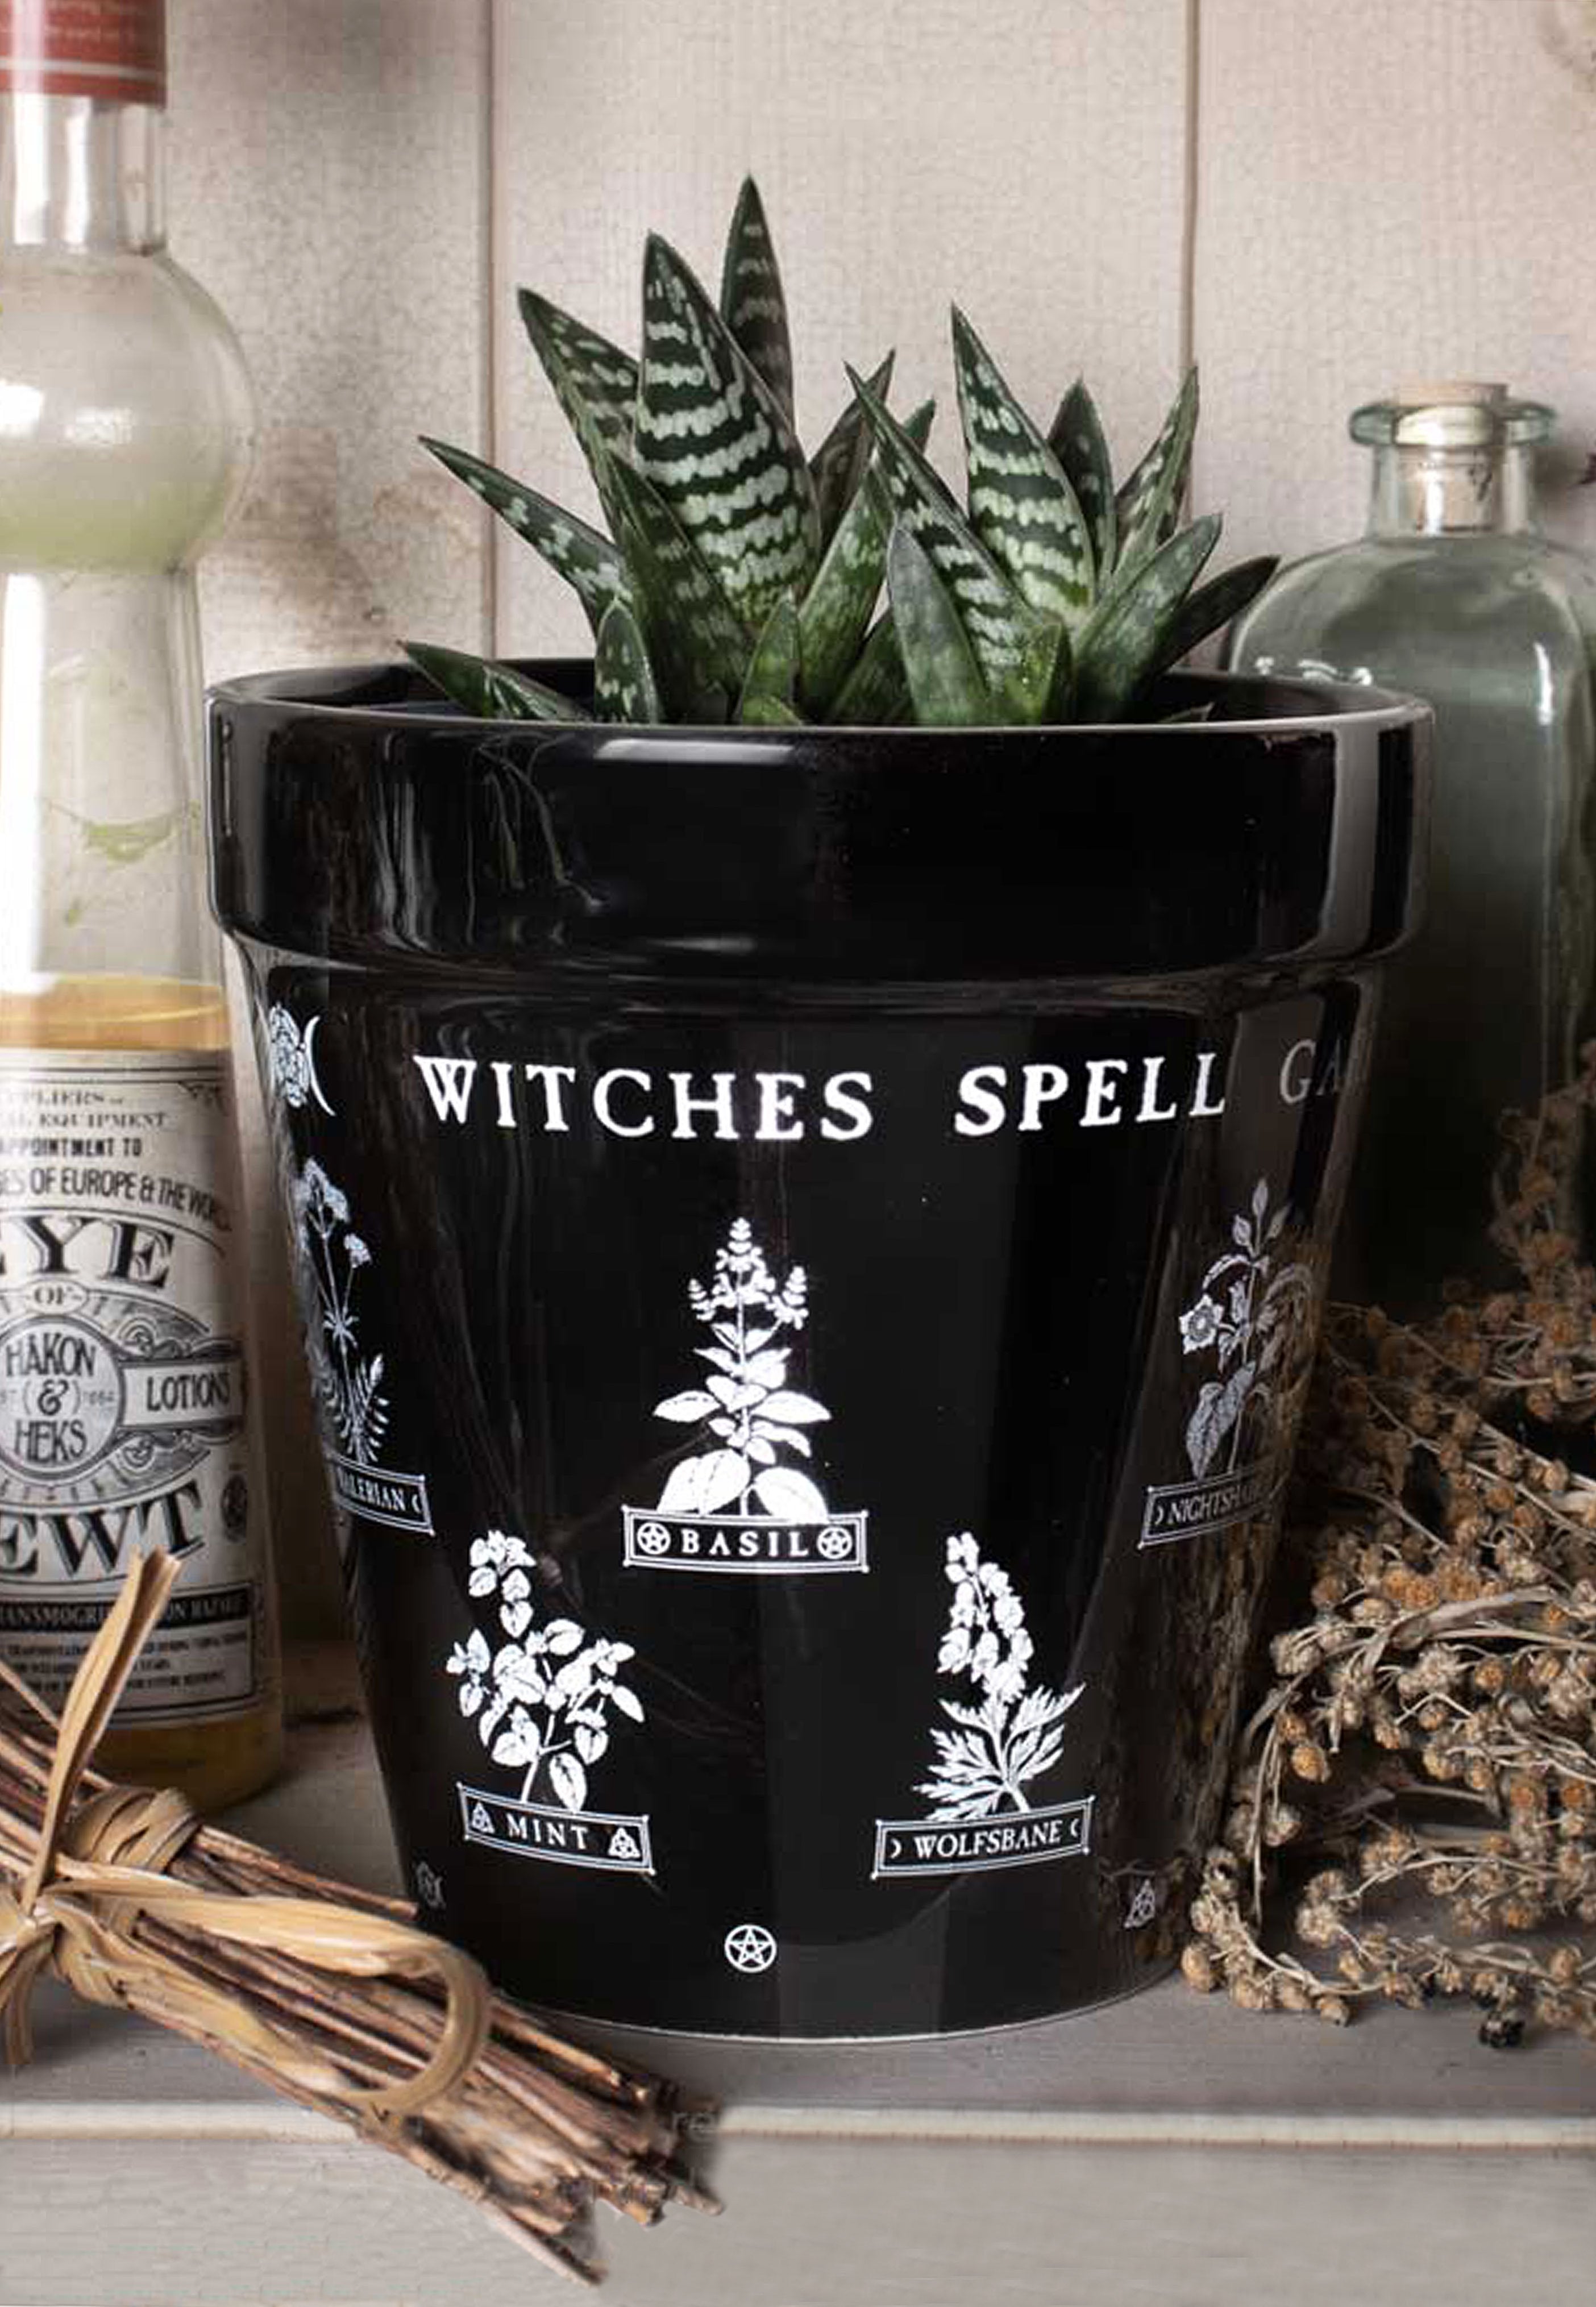 Alchemy England - Witches Spell Garden - Plant Pot